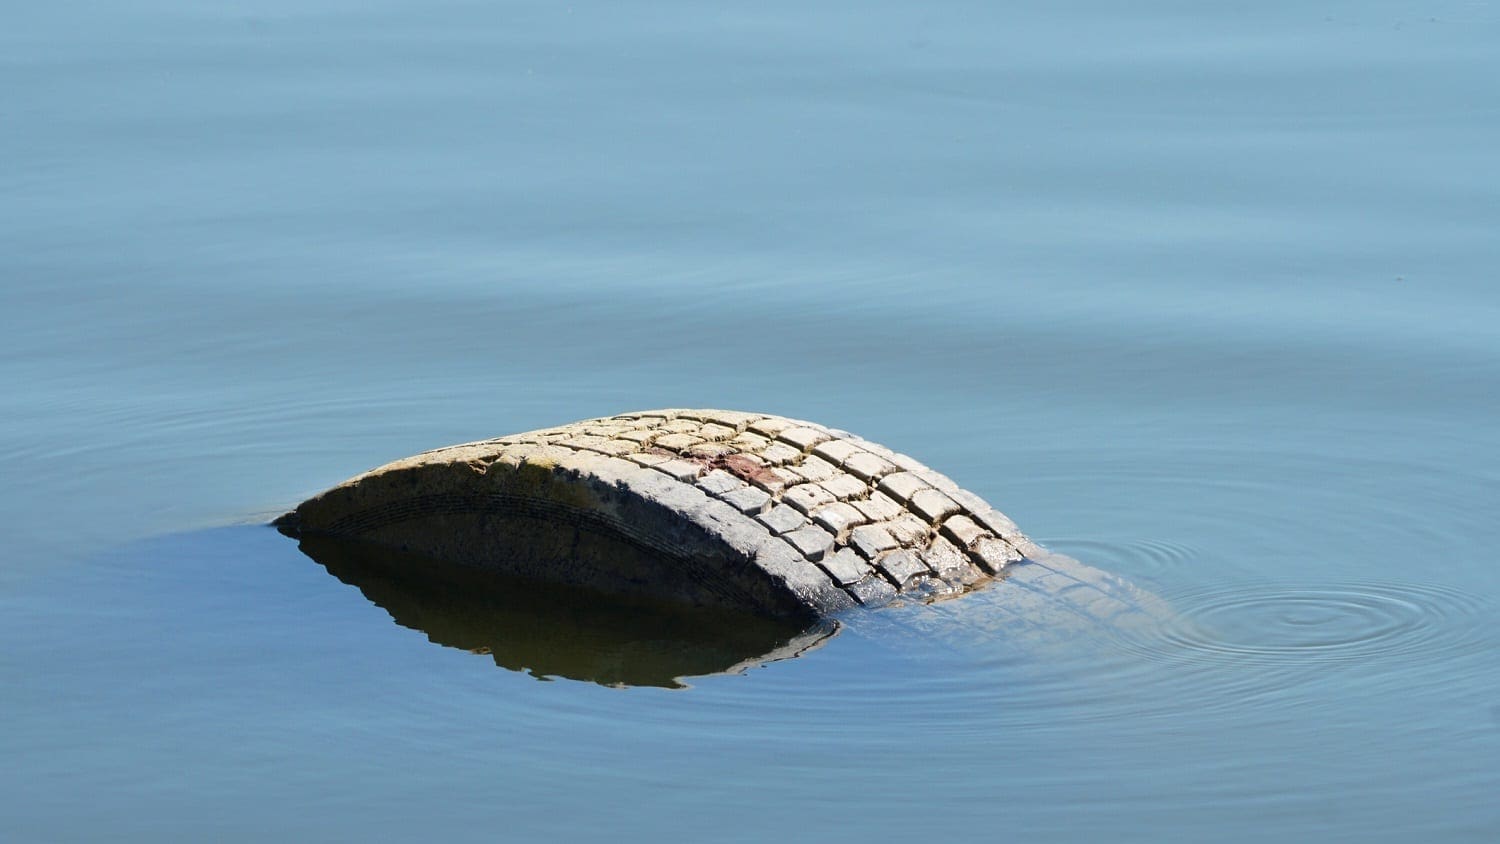 Abandoned tire with edge showing above a lake's surface: Photo 115611969 © Gintas7333 | Dreamstime.com